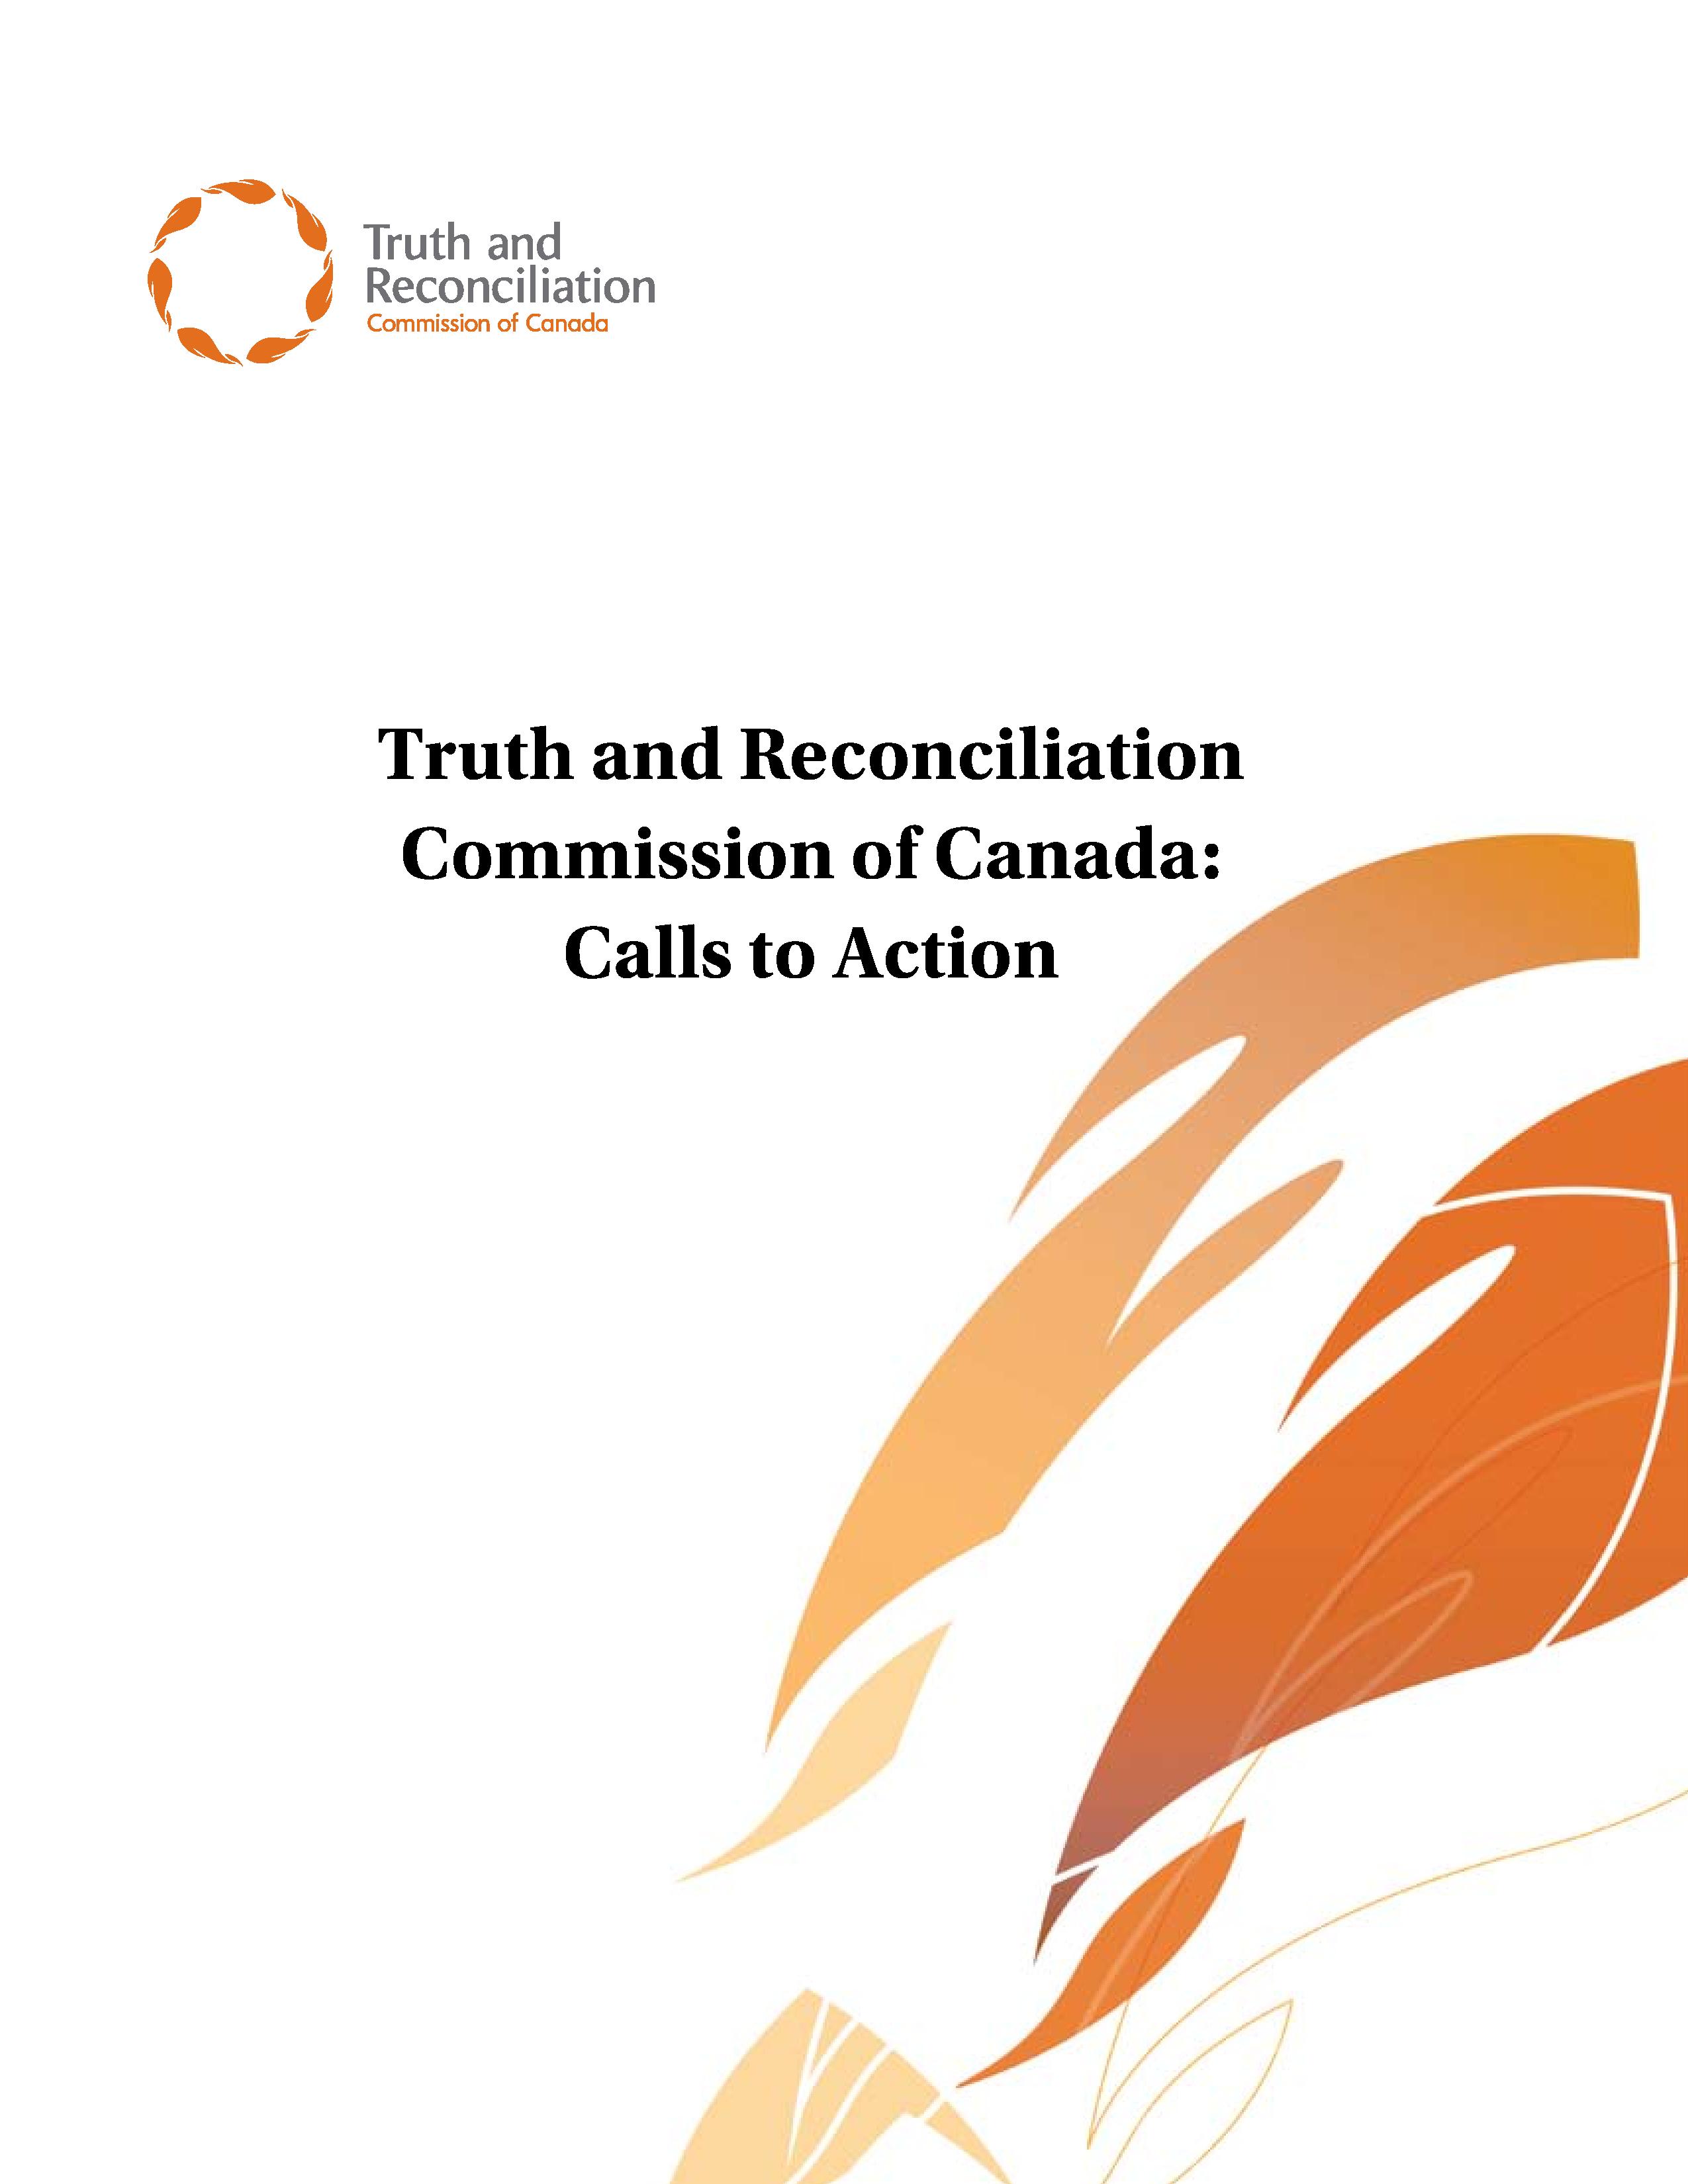 TRC Calls to Action